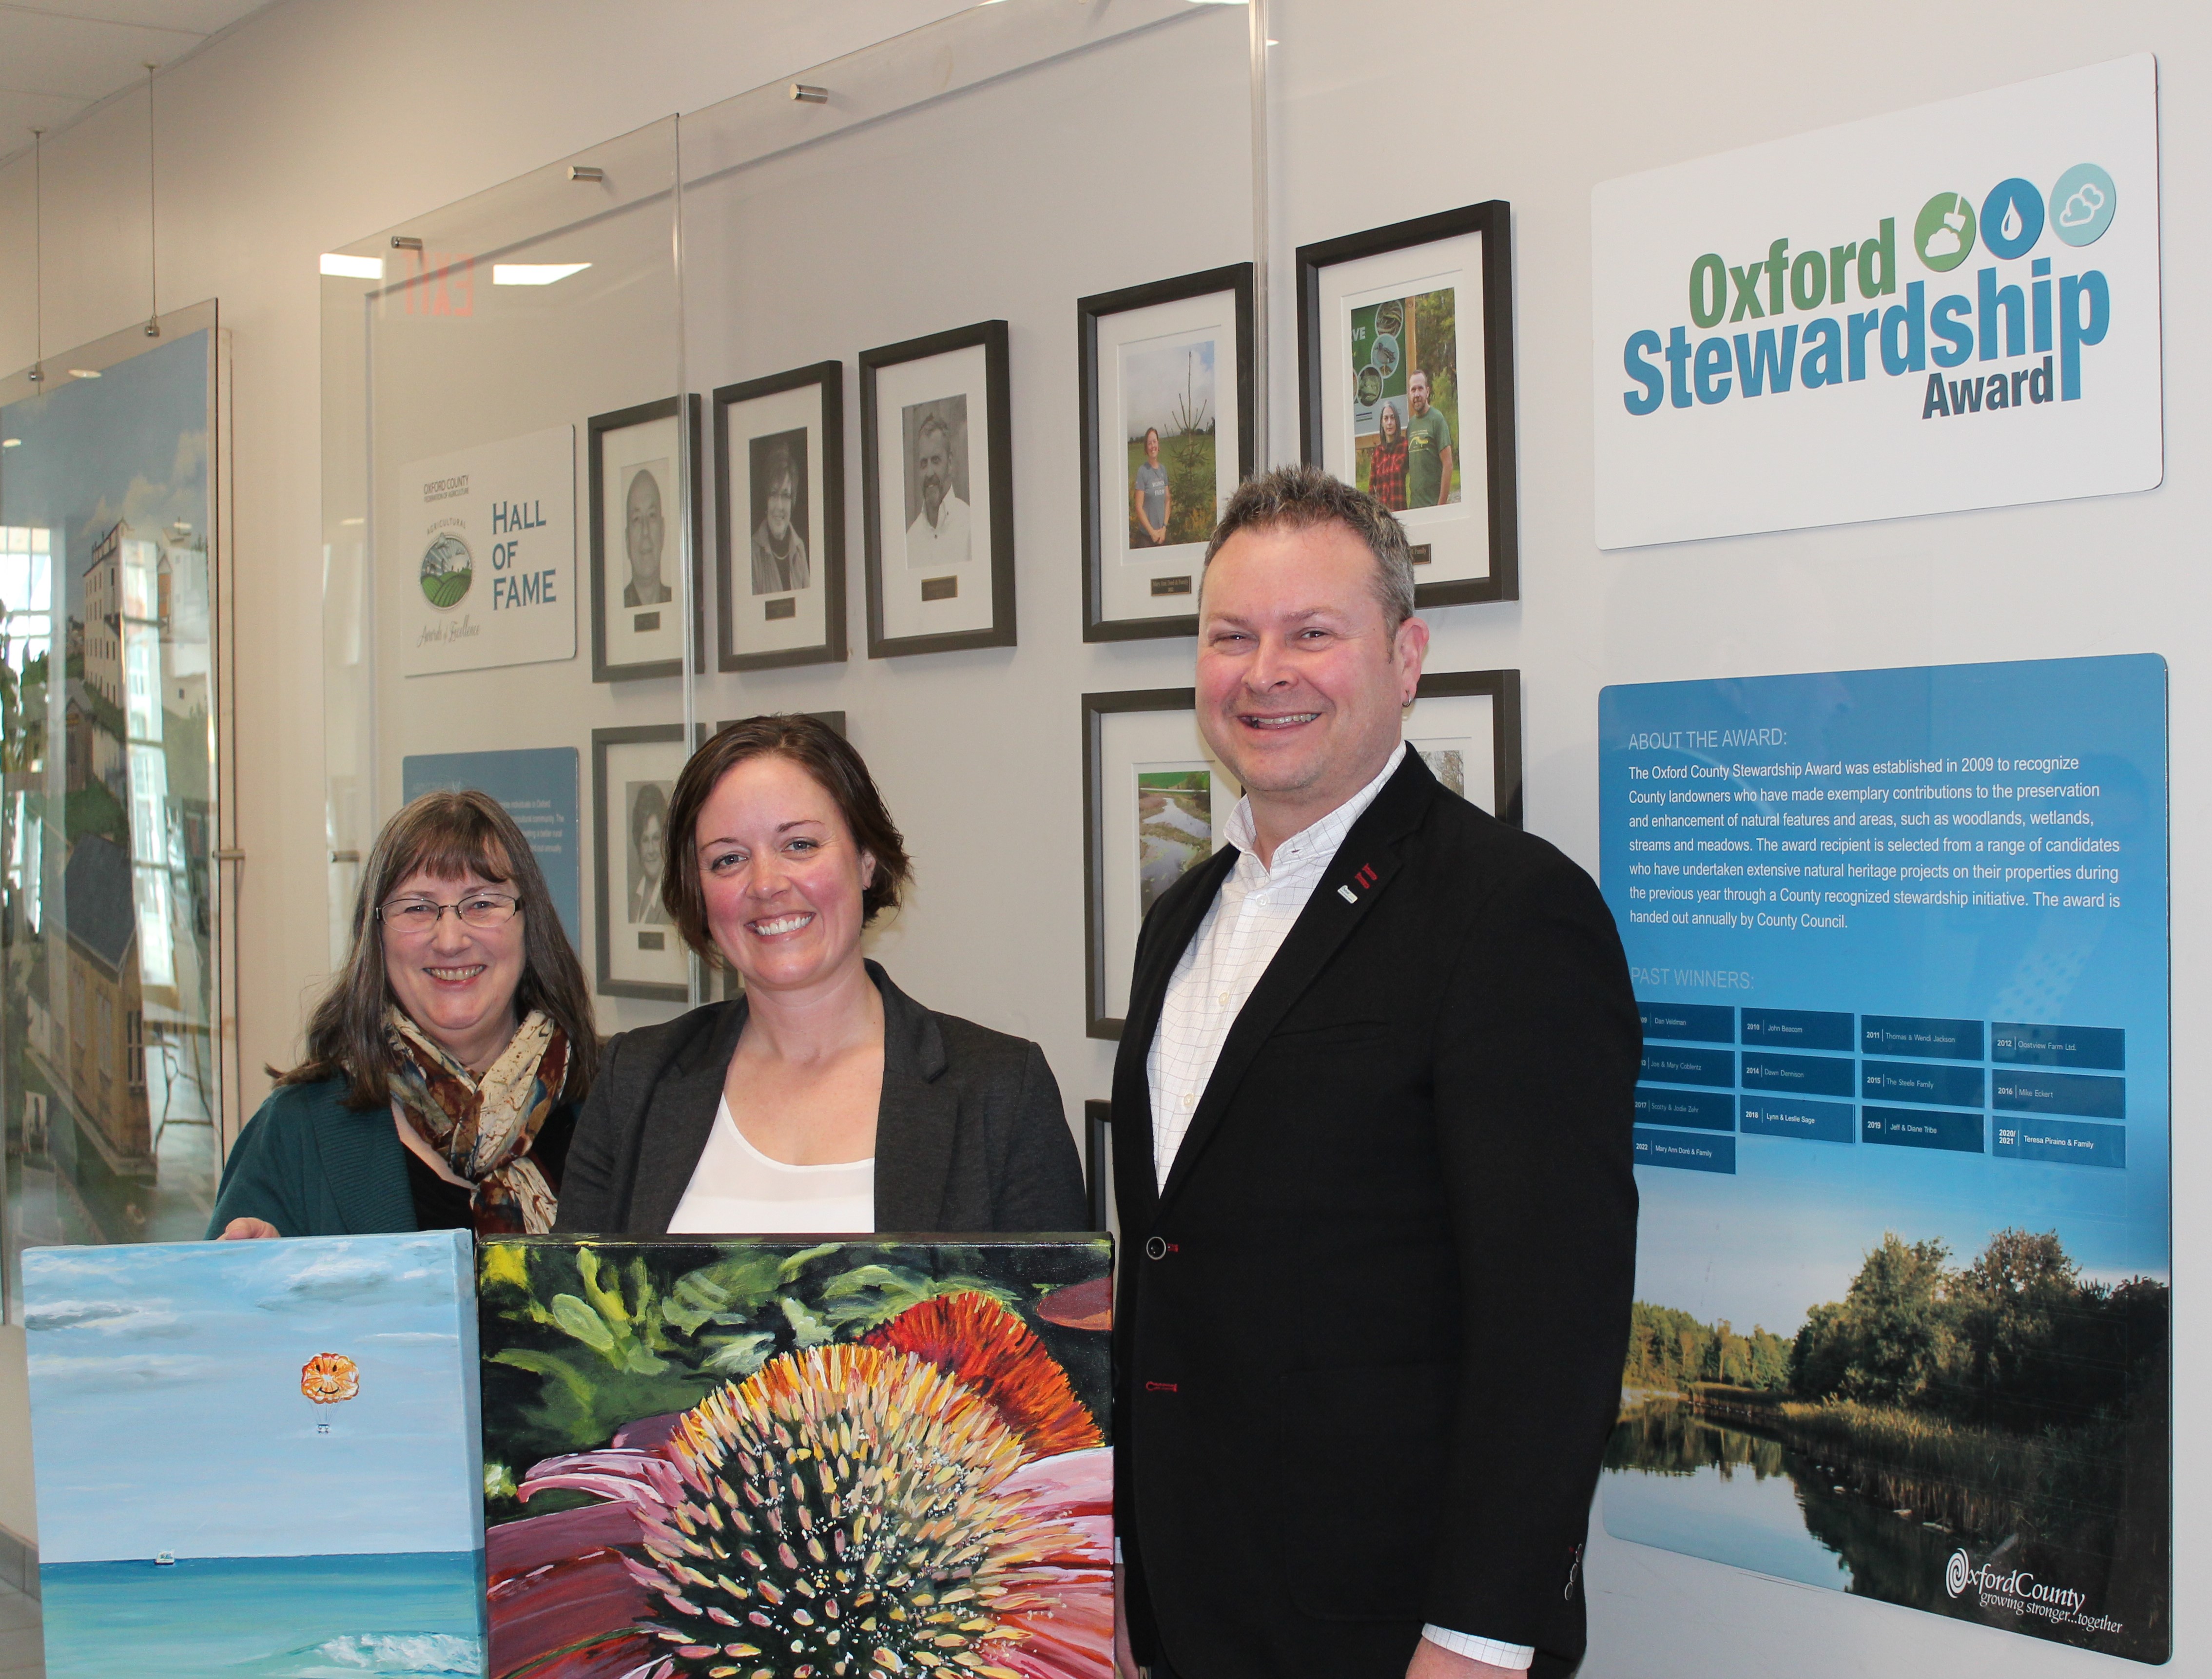 Vonnie Snyder Mary Anne Dore and Warden Ryan with original artwork in front of the Oxford Stewardship Award wall 